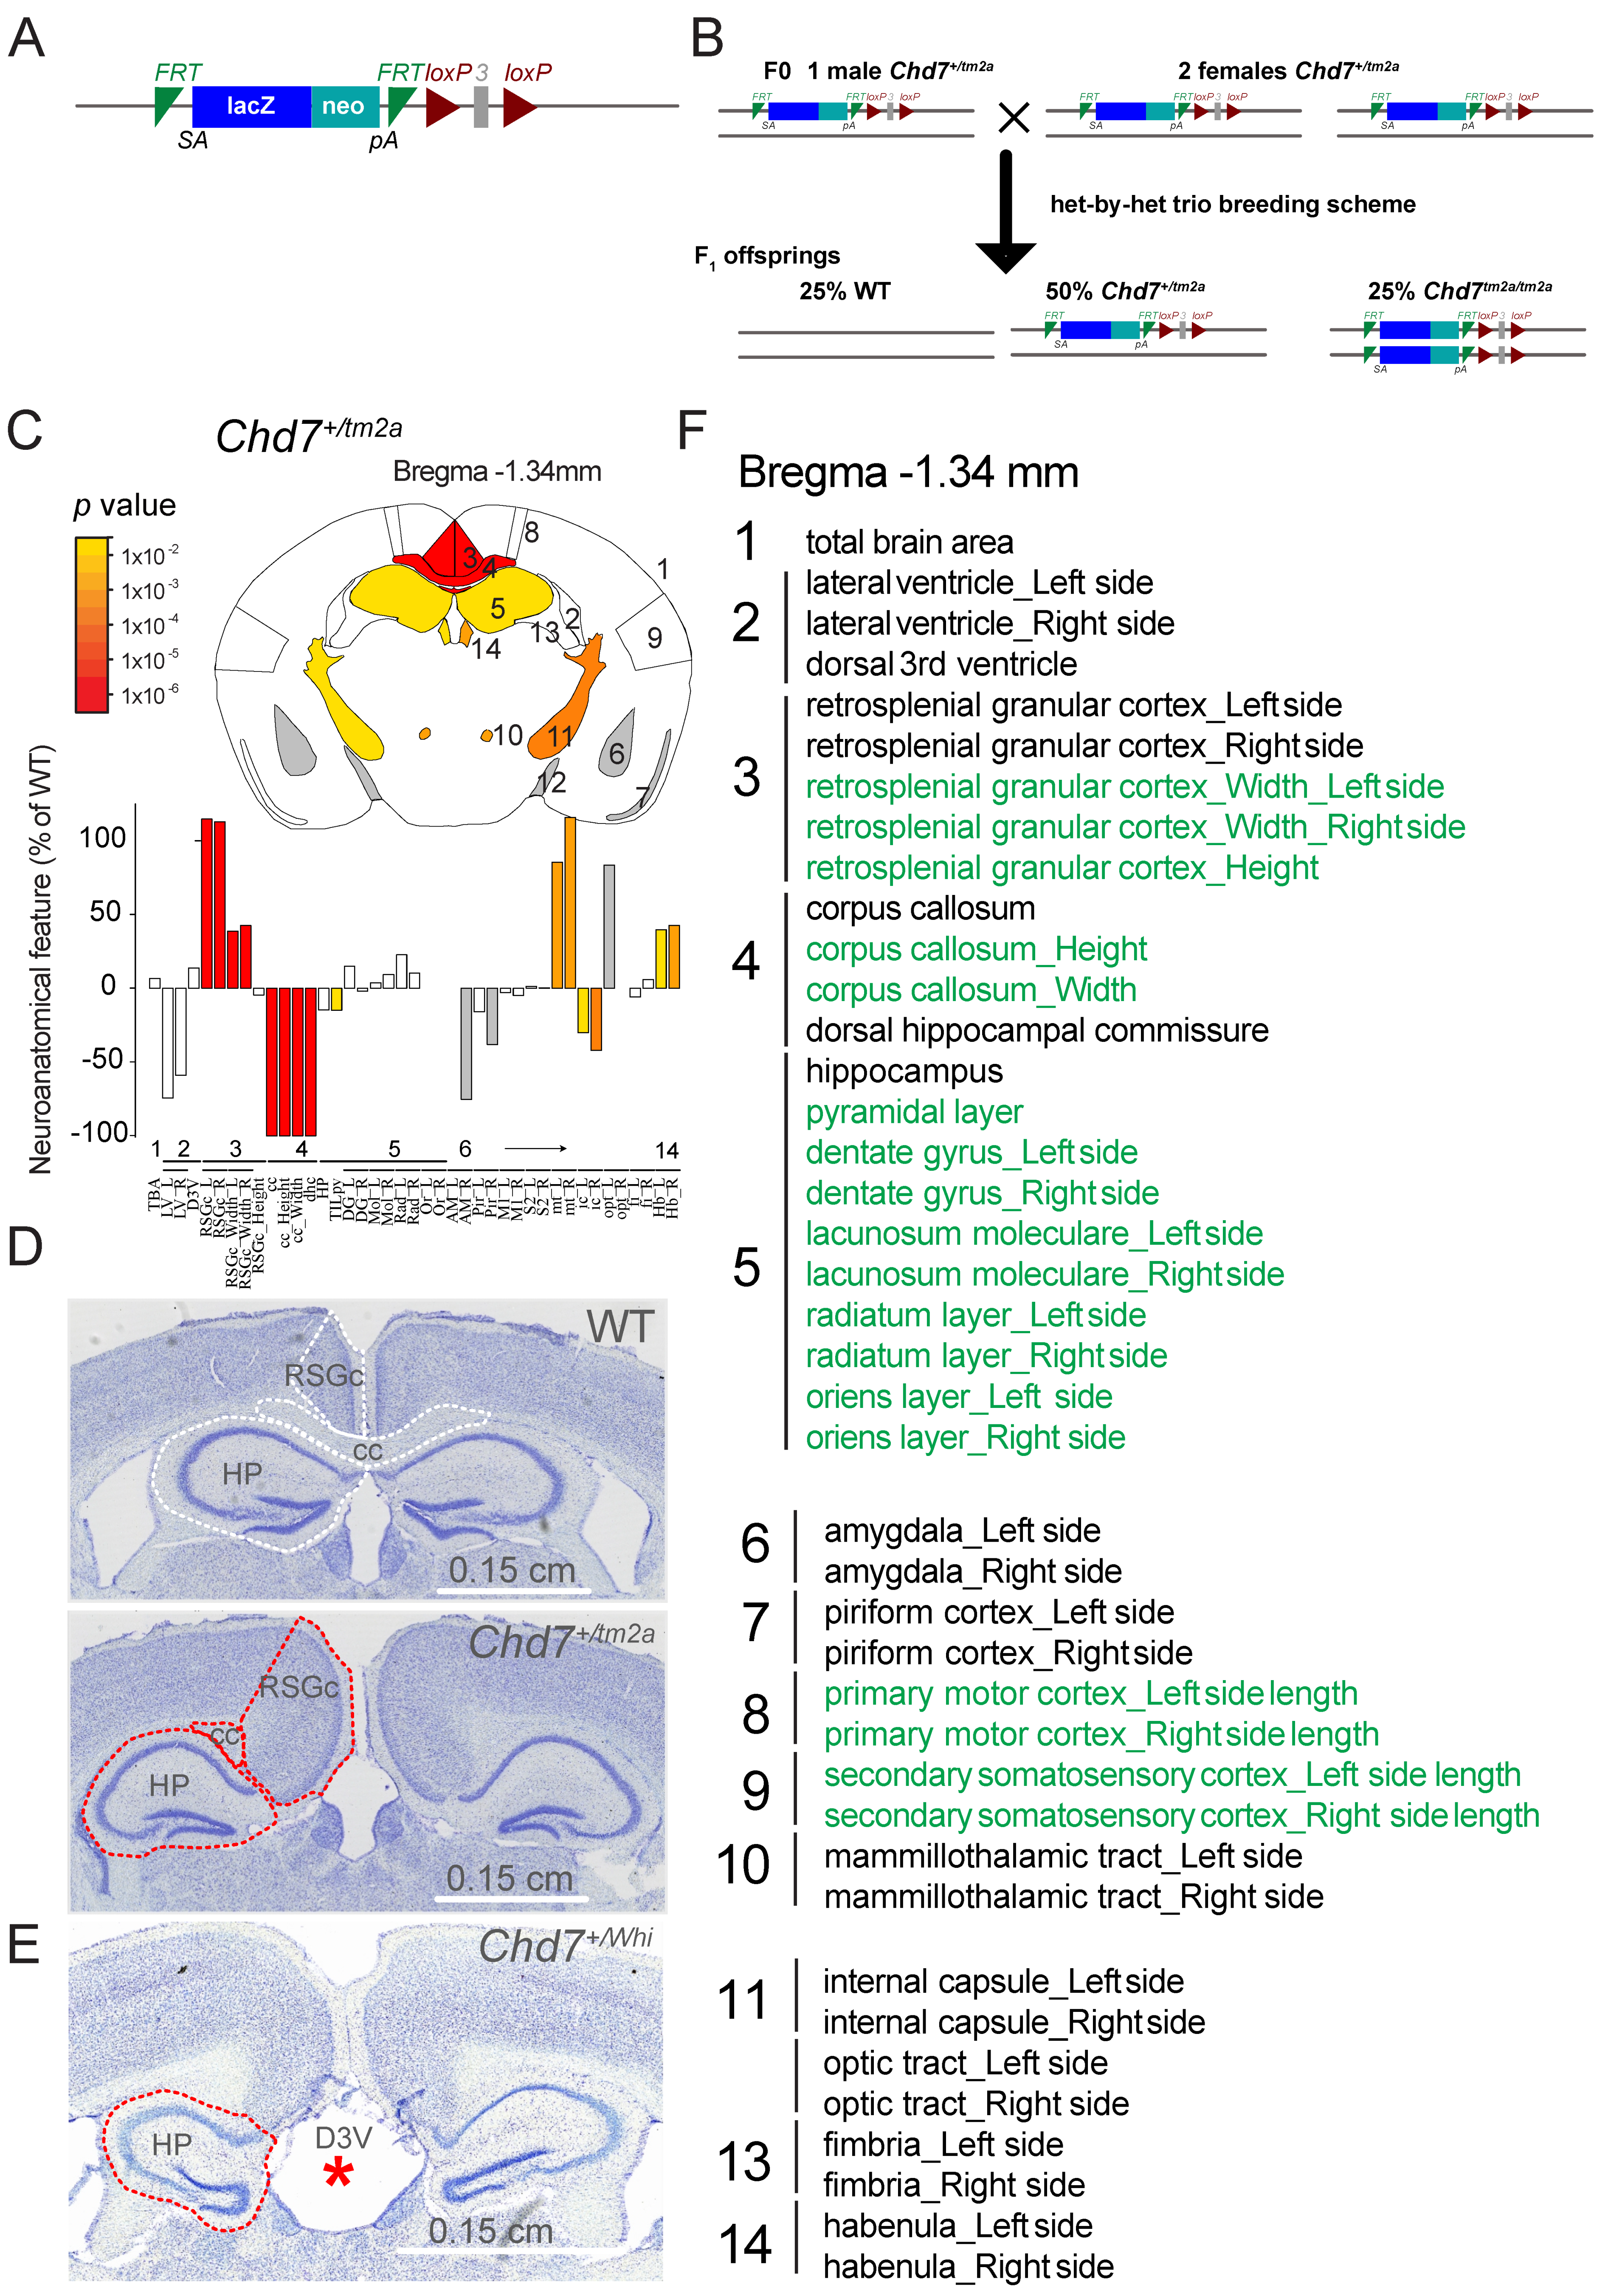 Large-scale neuroanatomical study uncovers 198 gene associations in mouse  brain morphogenesis